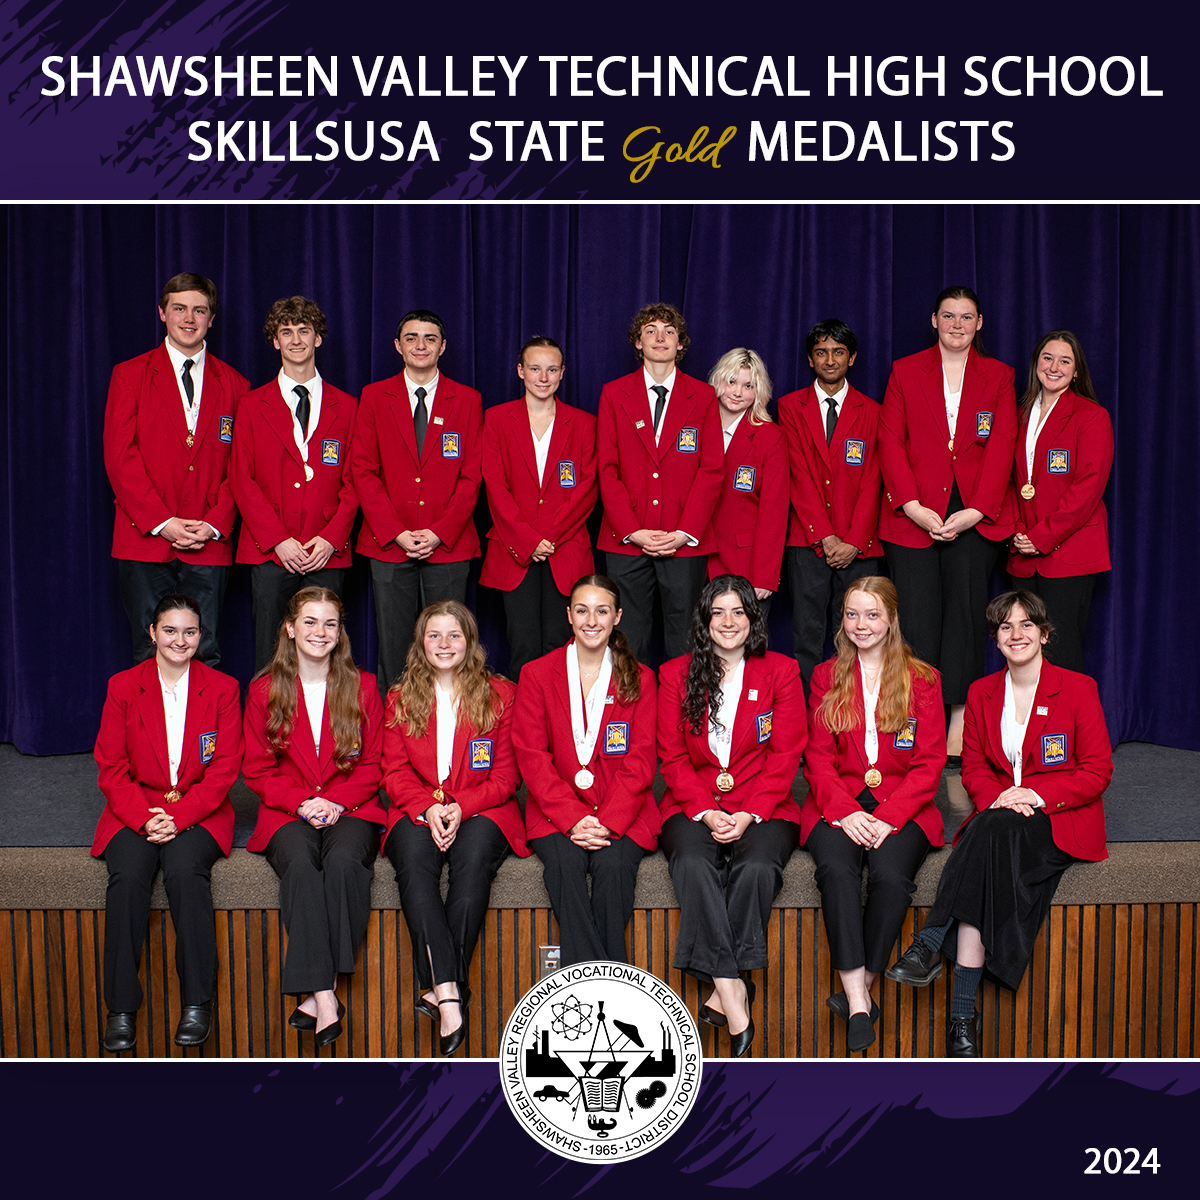 Congrats to Shawsheen's 16 #SkillsUSA state gold medalists! Shawsheen proudly sent 56 qualifying students to states with an impressive 28 earning medals. Of those, these 16 champions took home  gold & will compete at nationals in June. #FutureReady @maskillsusa @shawsheenskills